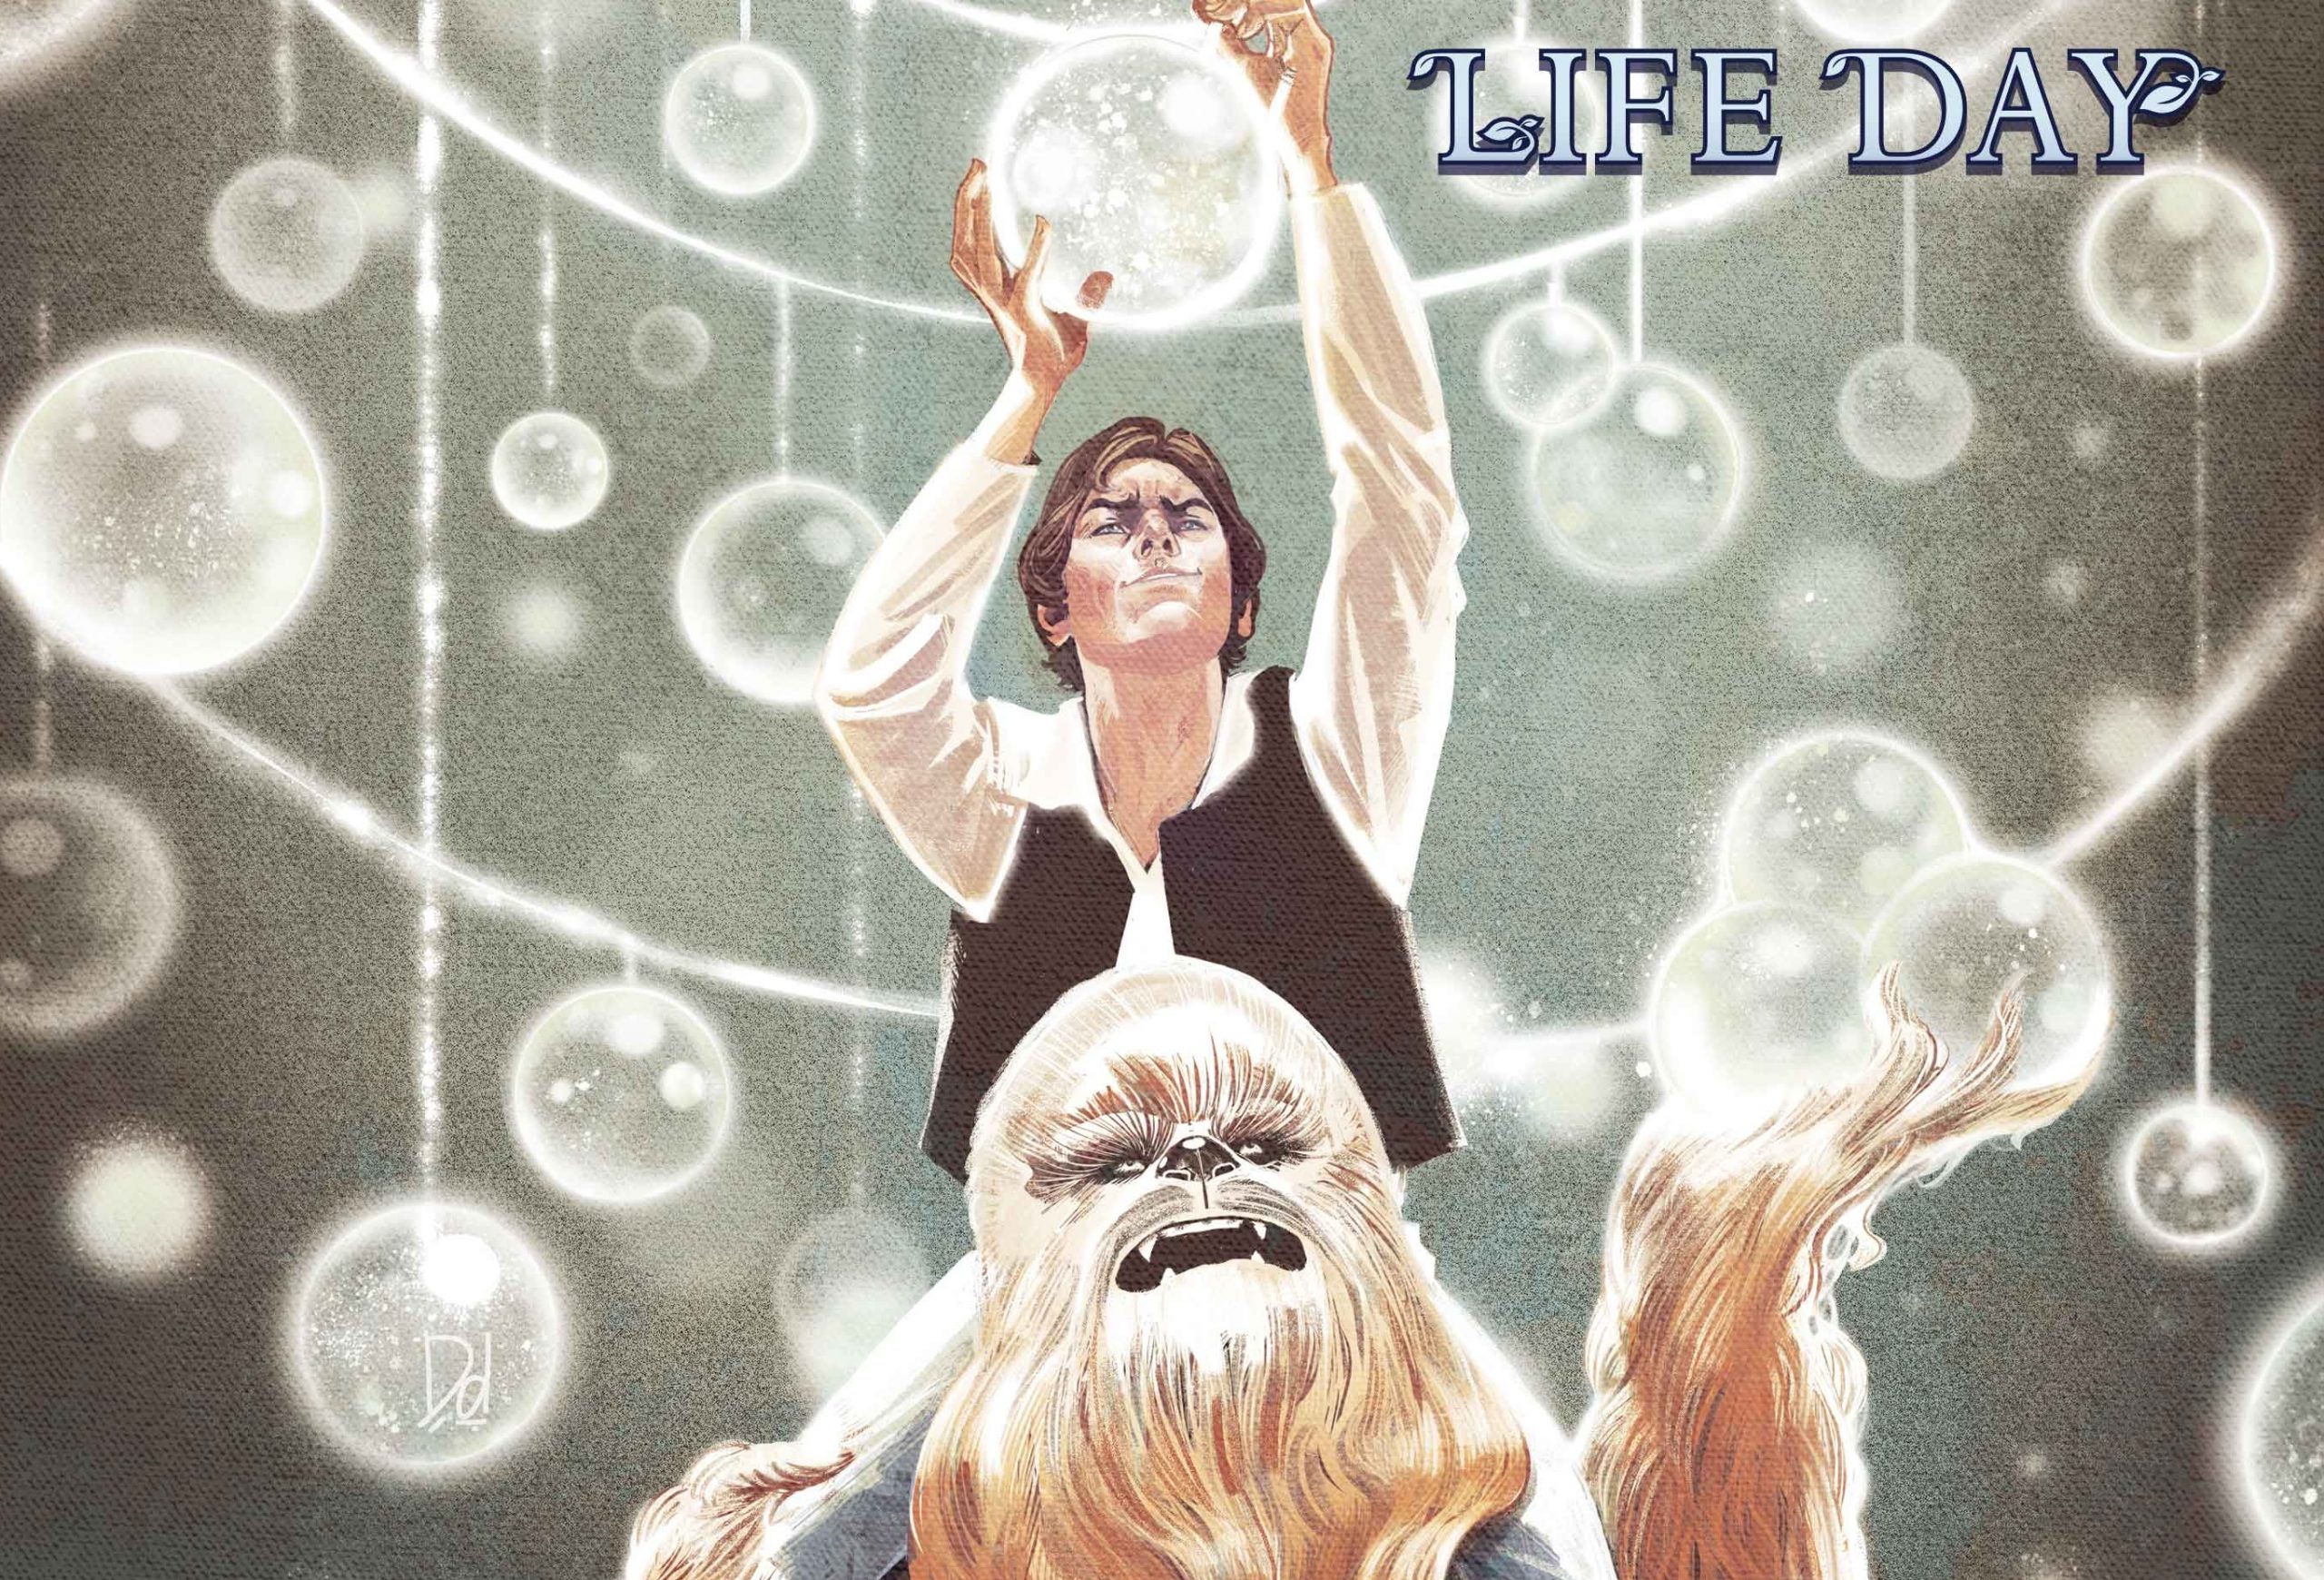 Celebrate Life Day with Star Wars variant covers next month